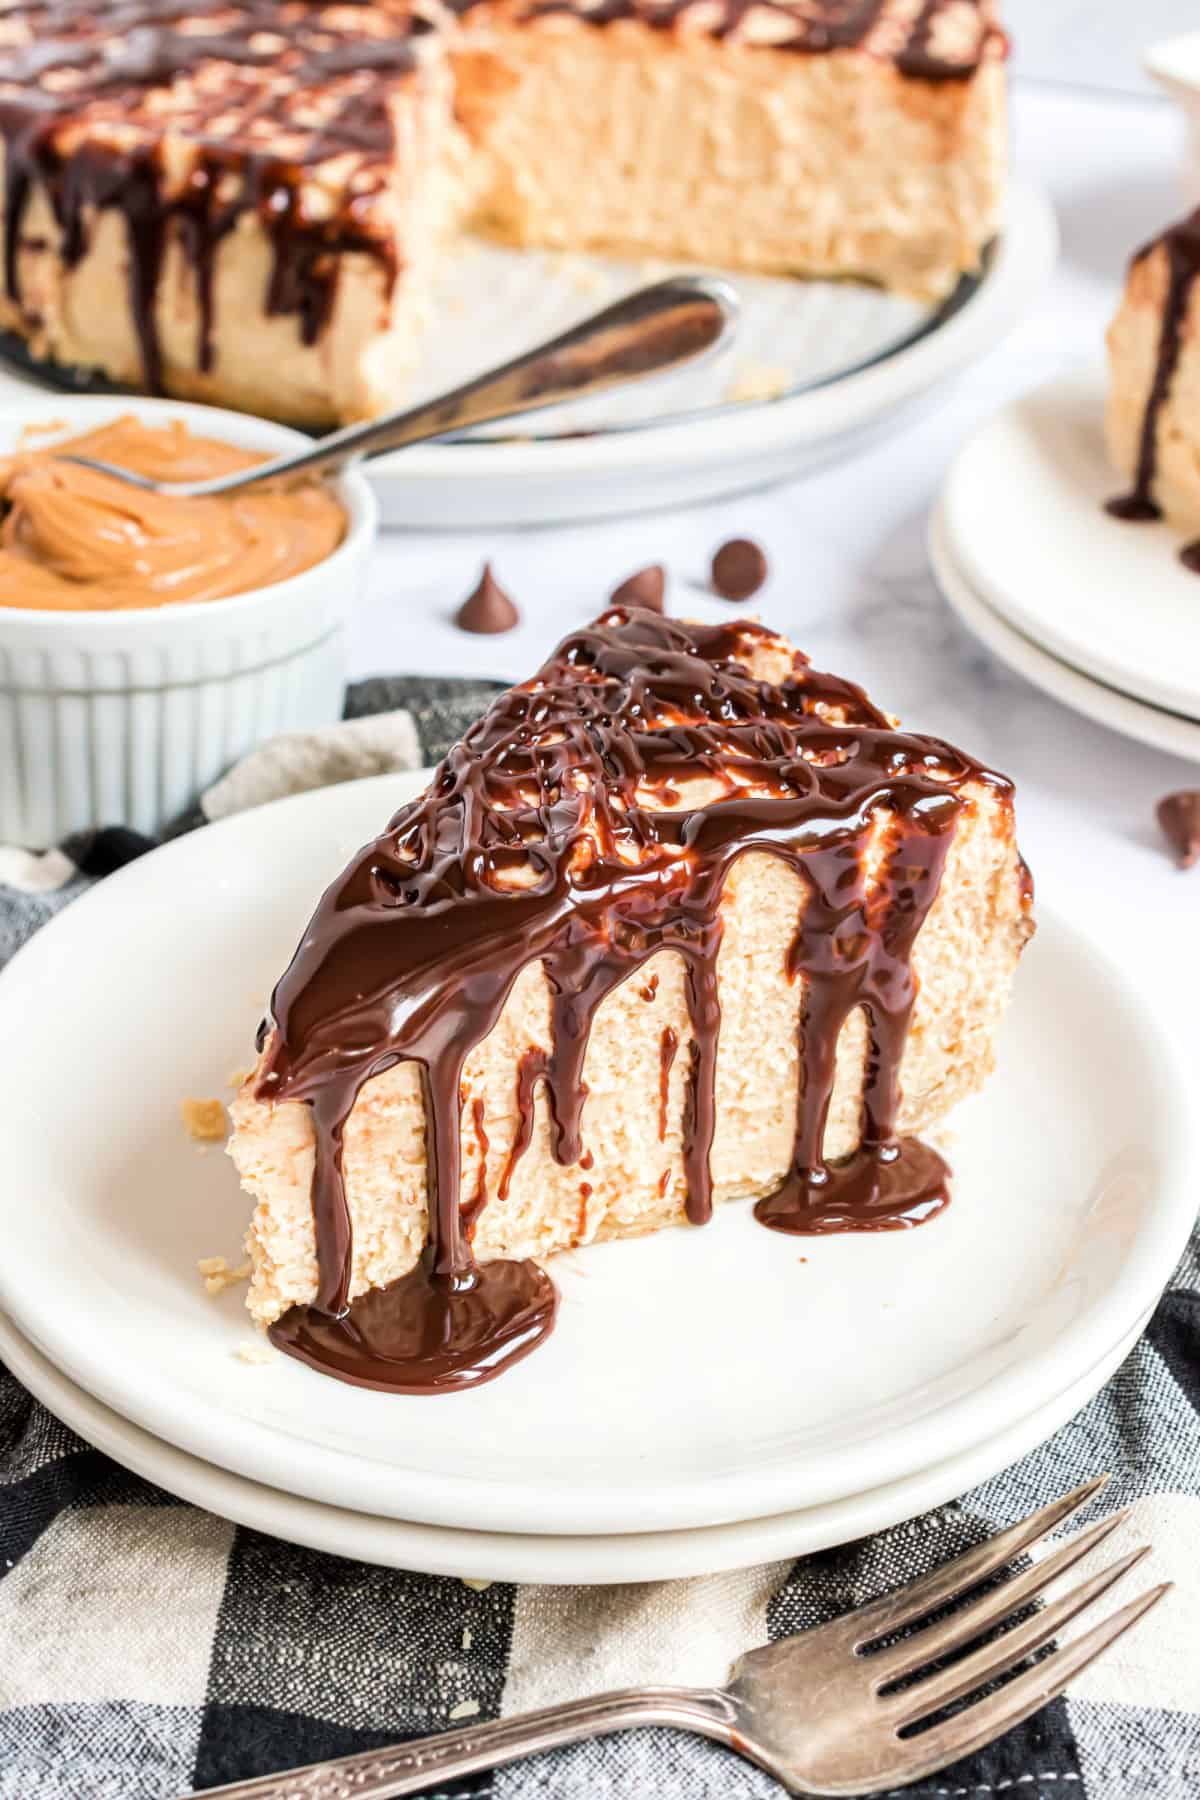 Slice of peanut butter pie with chocolate ganache on top.